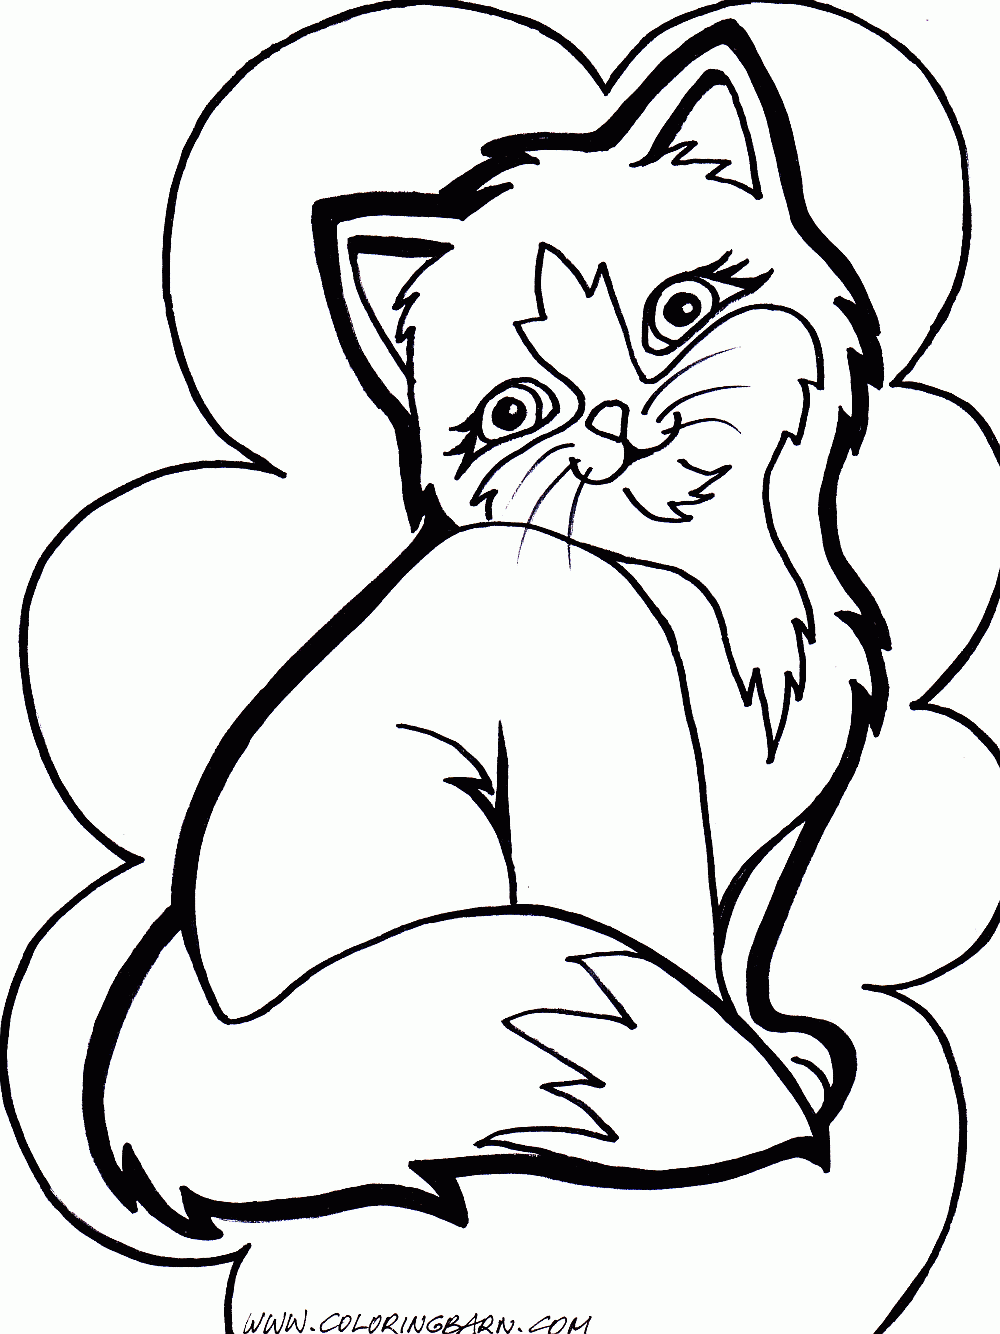 Cat And Kitten Coloring Page - Coloring Home